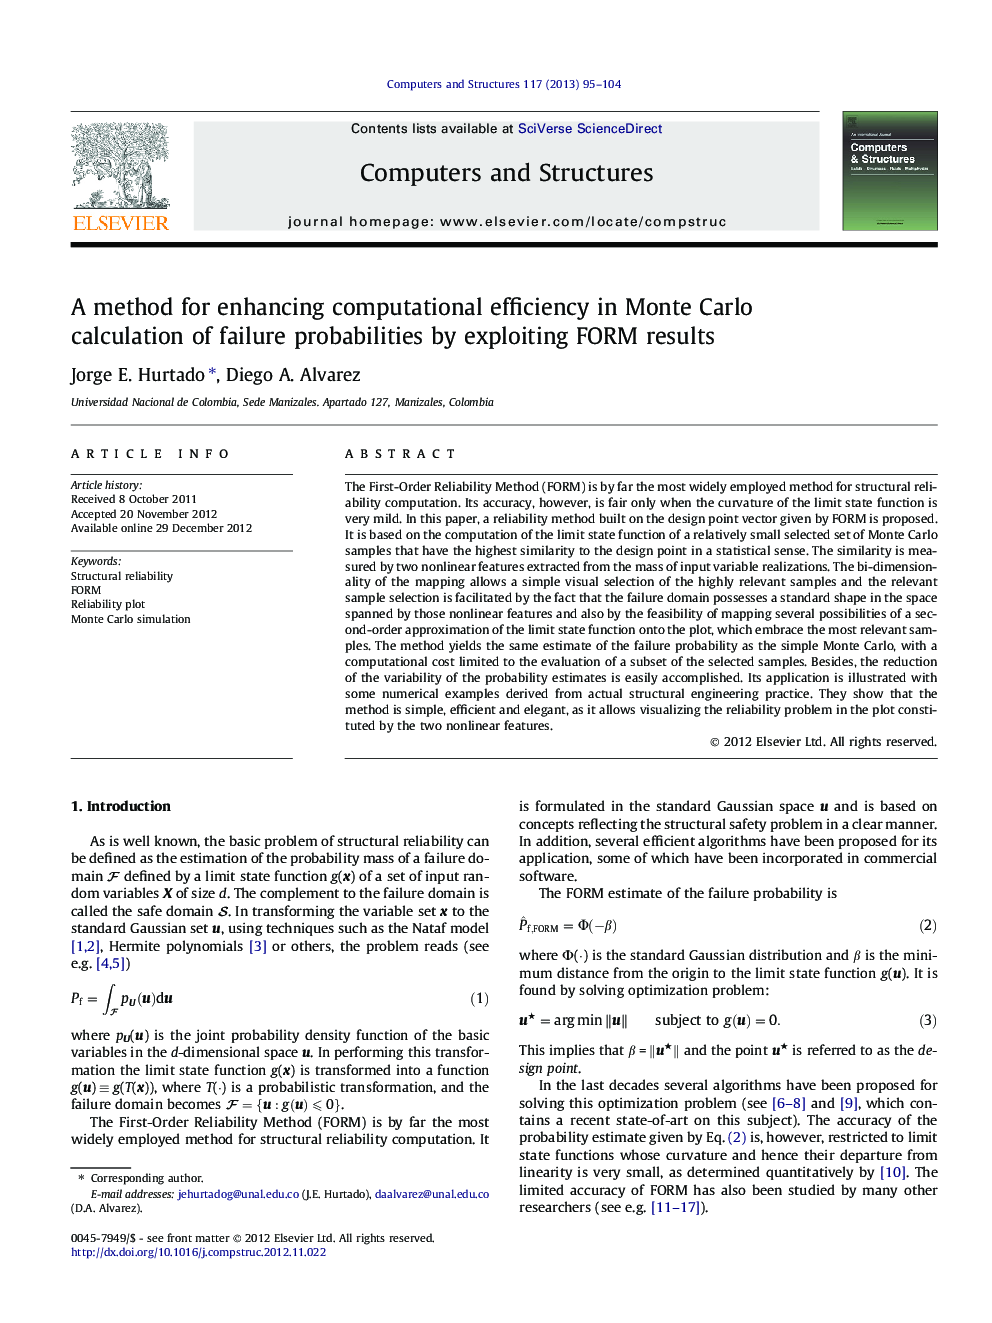 A method for enhancing computational efficiency in Monte Carlo calculation of failure probabilities by exploiting FORM results